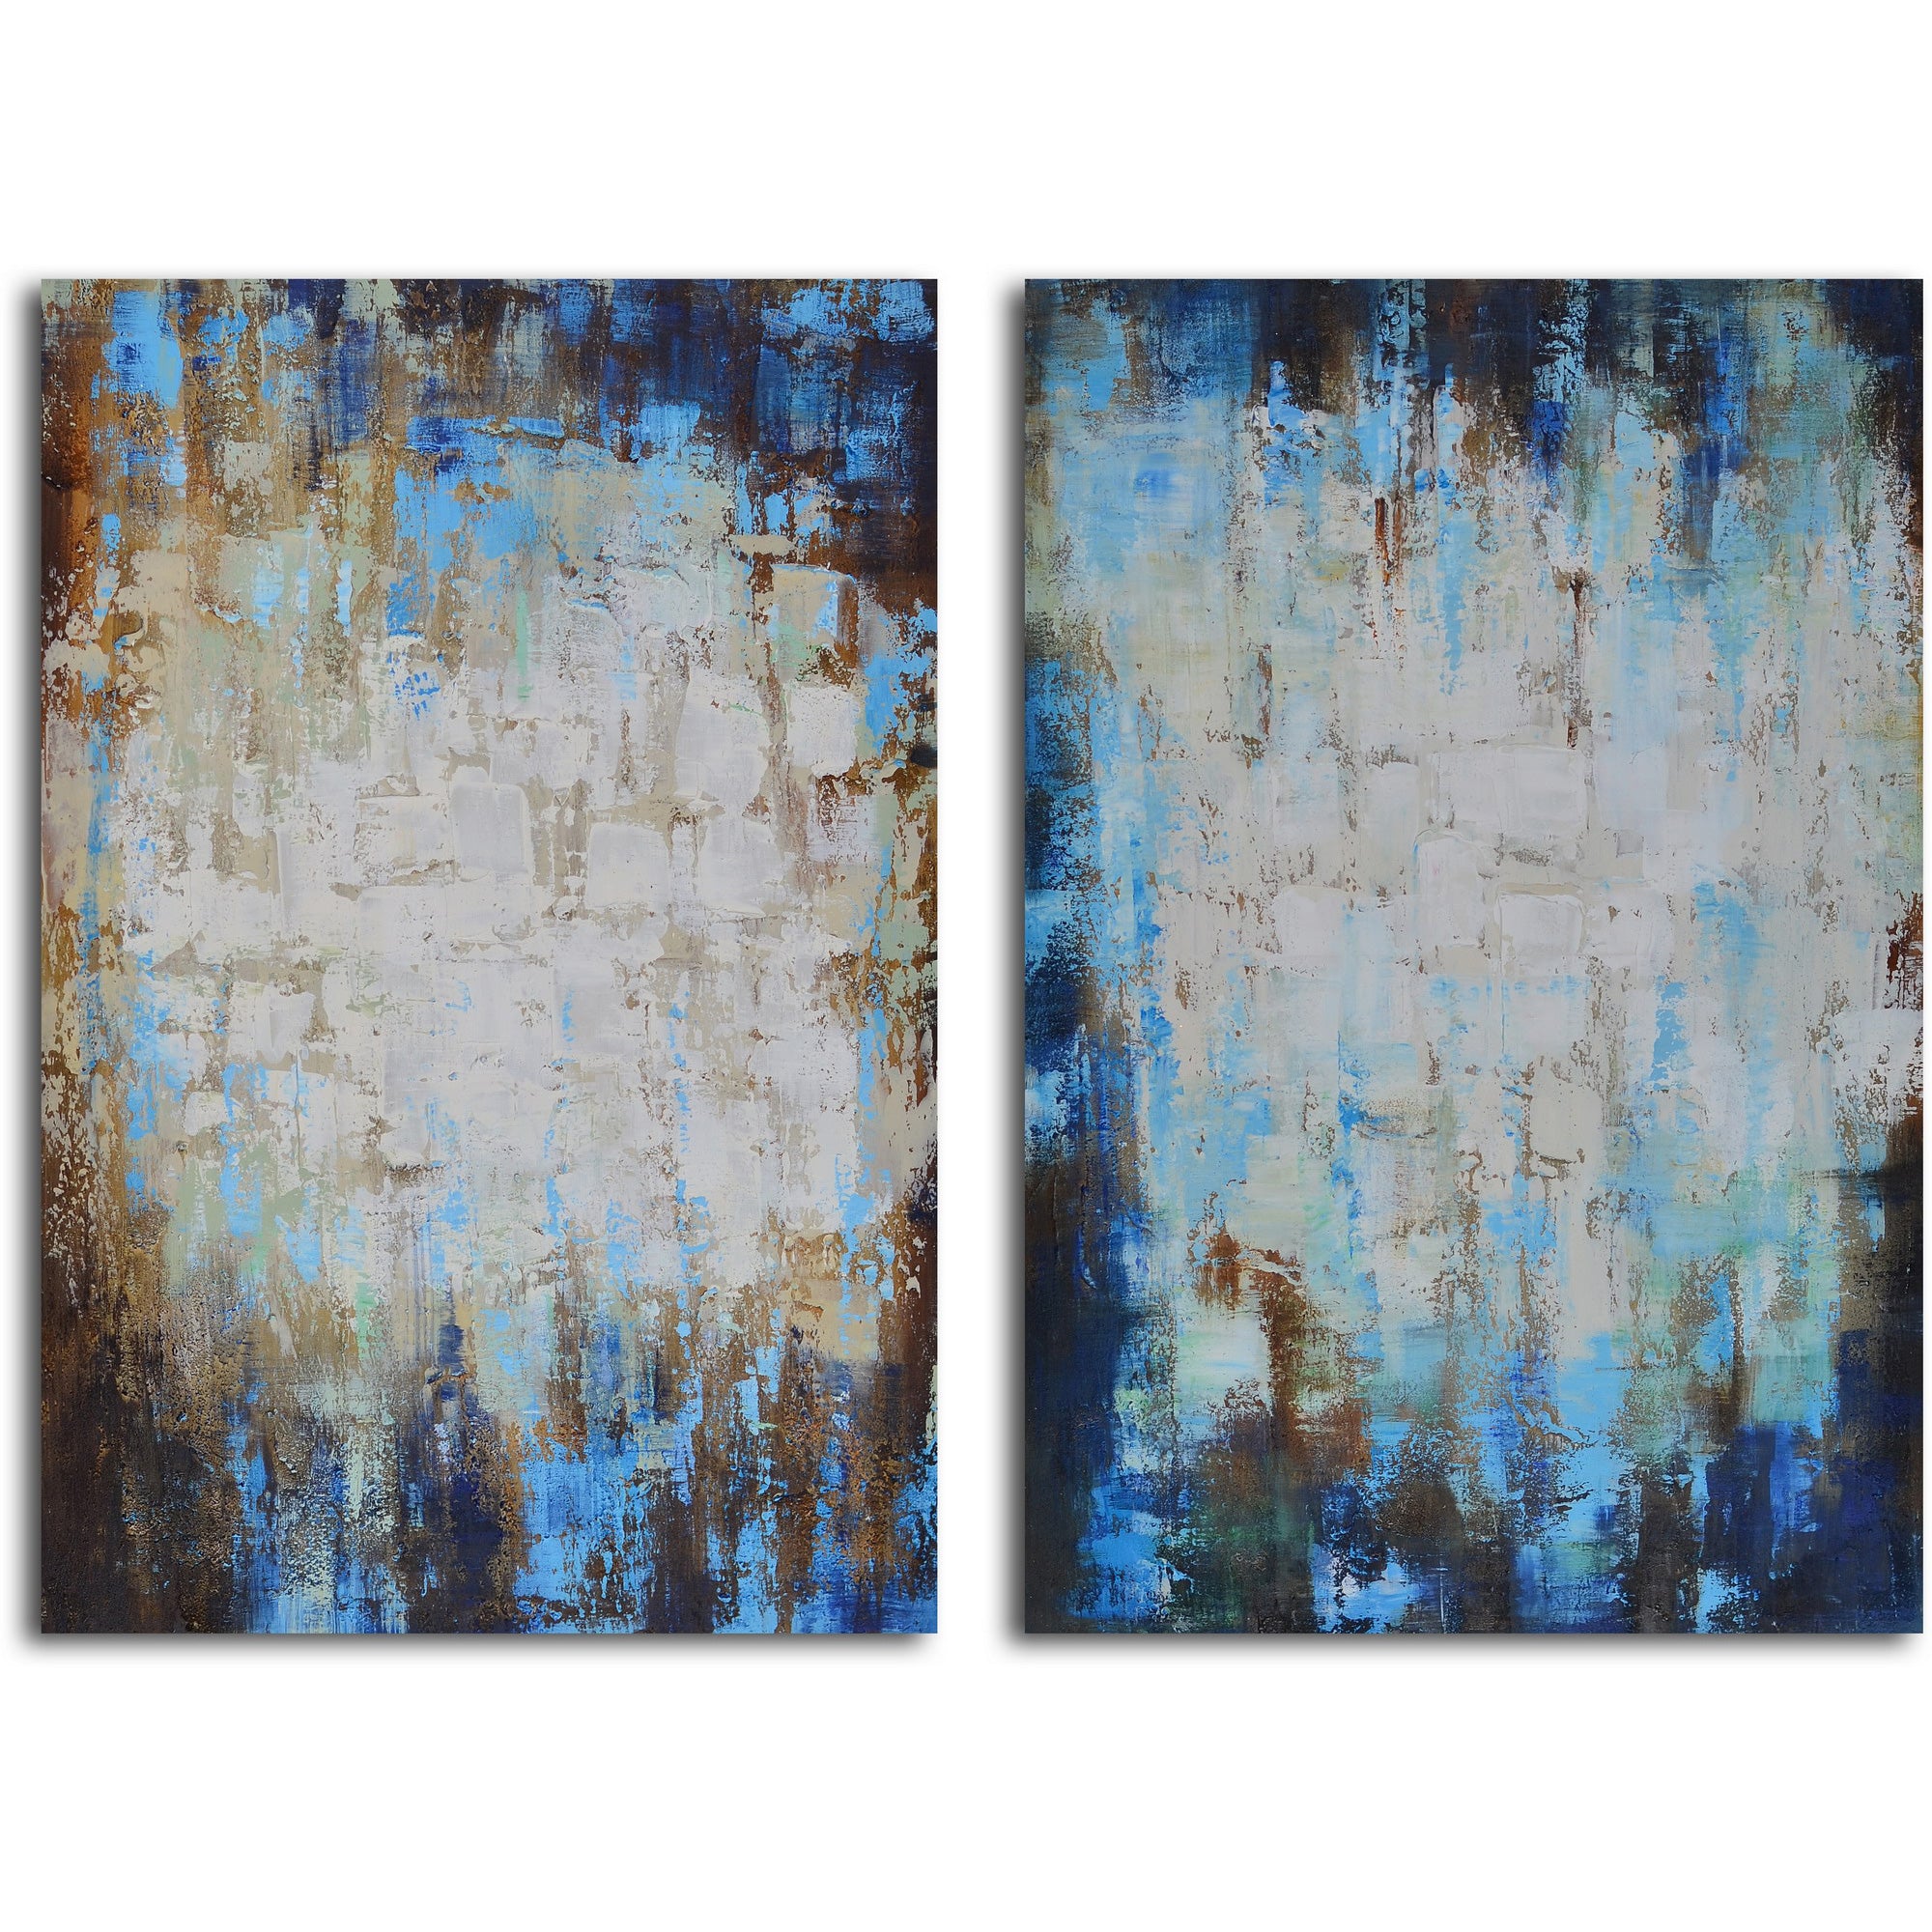 Hand Painted "Through blues to light" 2 Piece Canvas Set